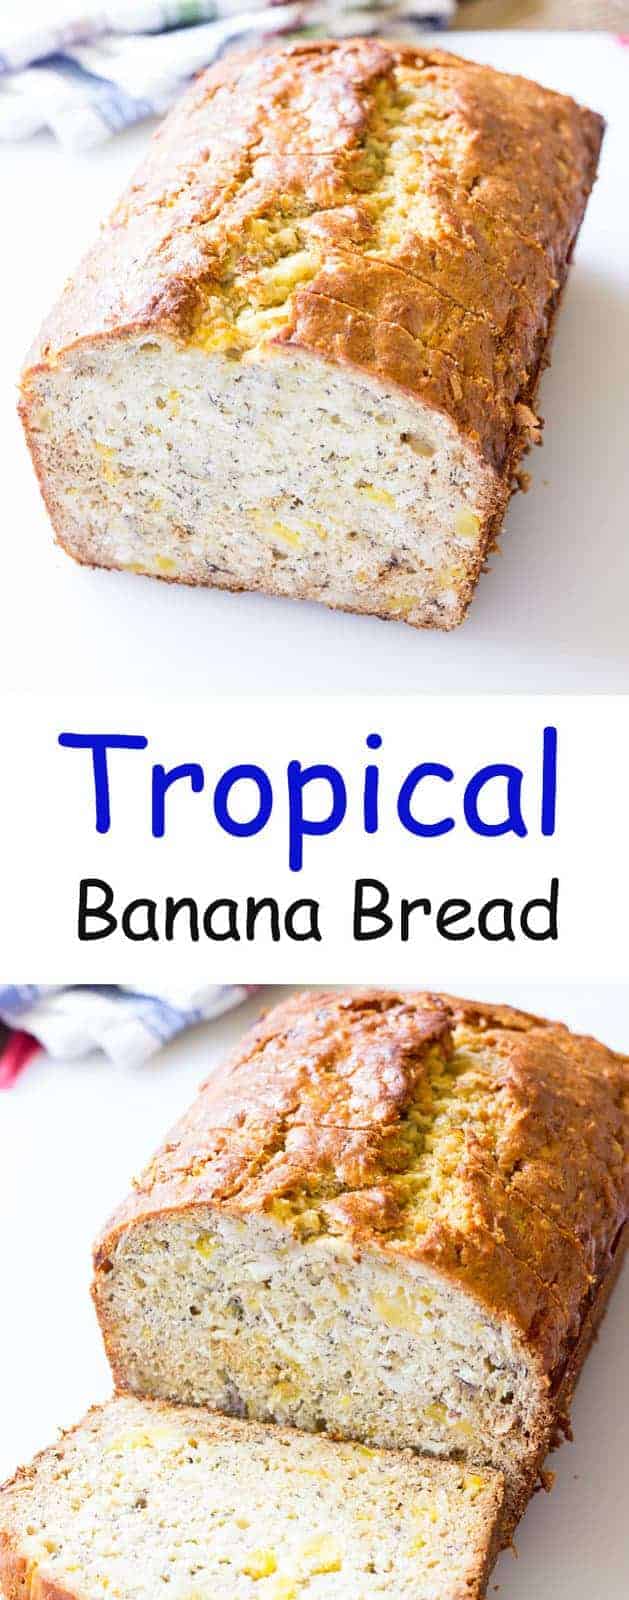 2 image collage with text showing Tropical Banana Bread